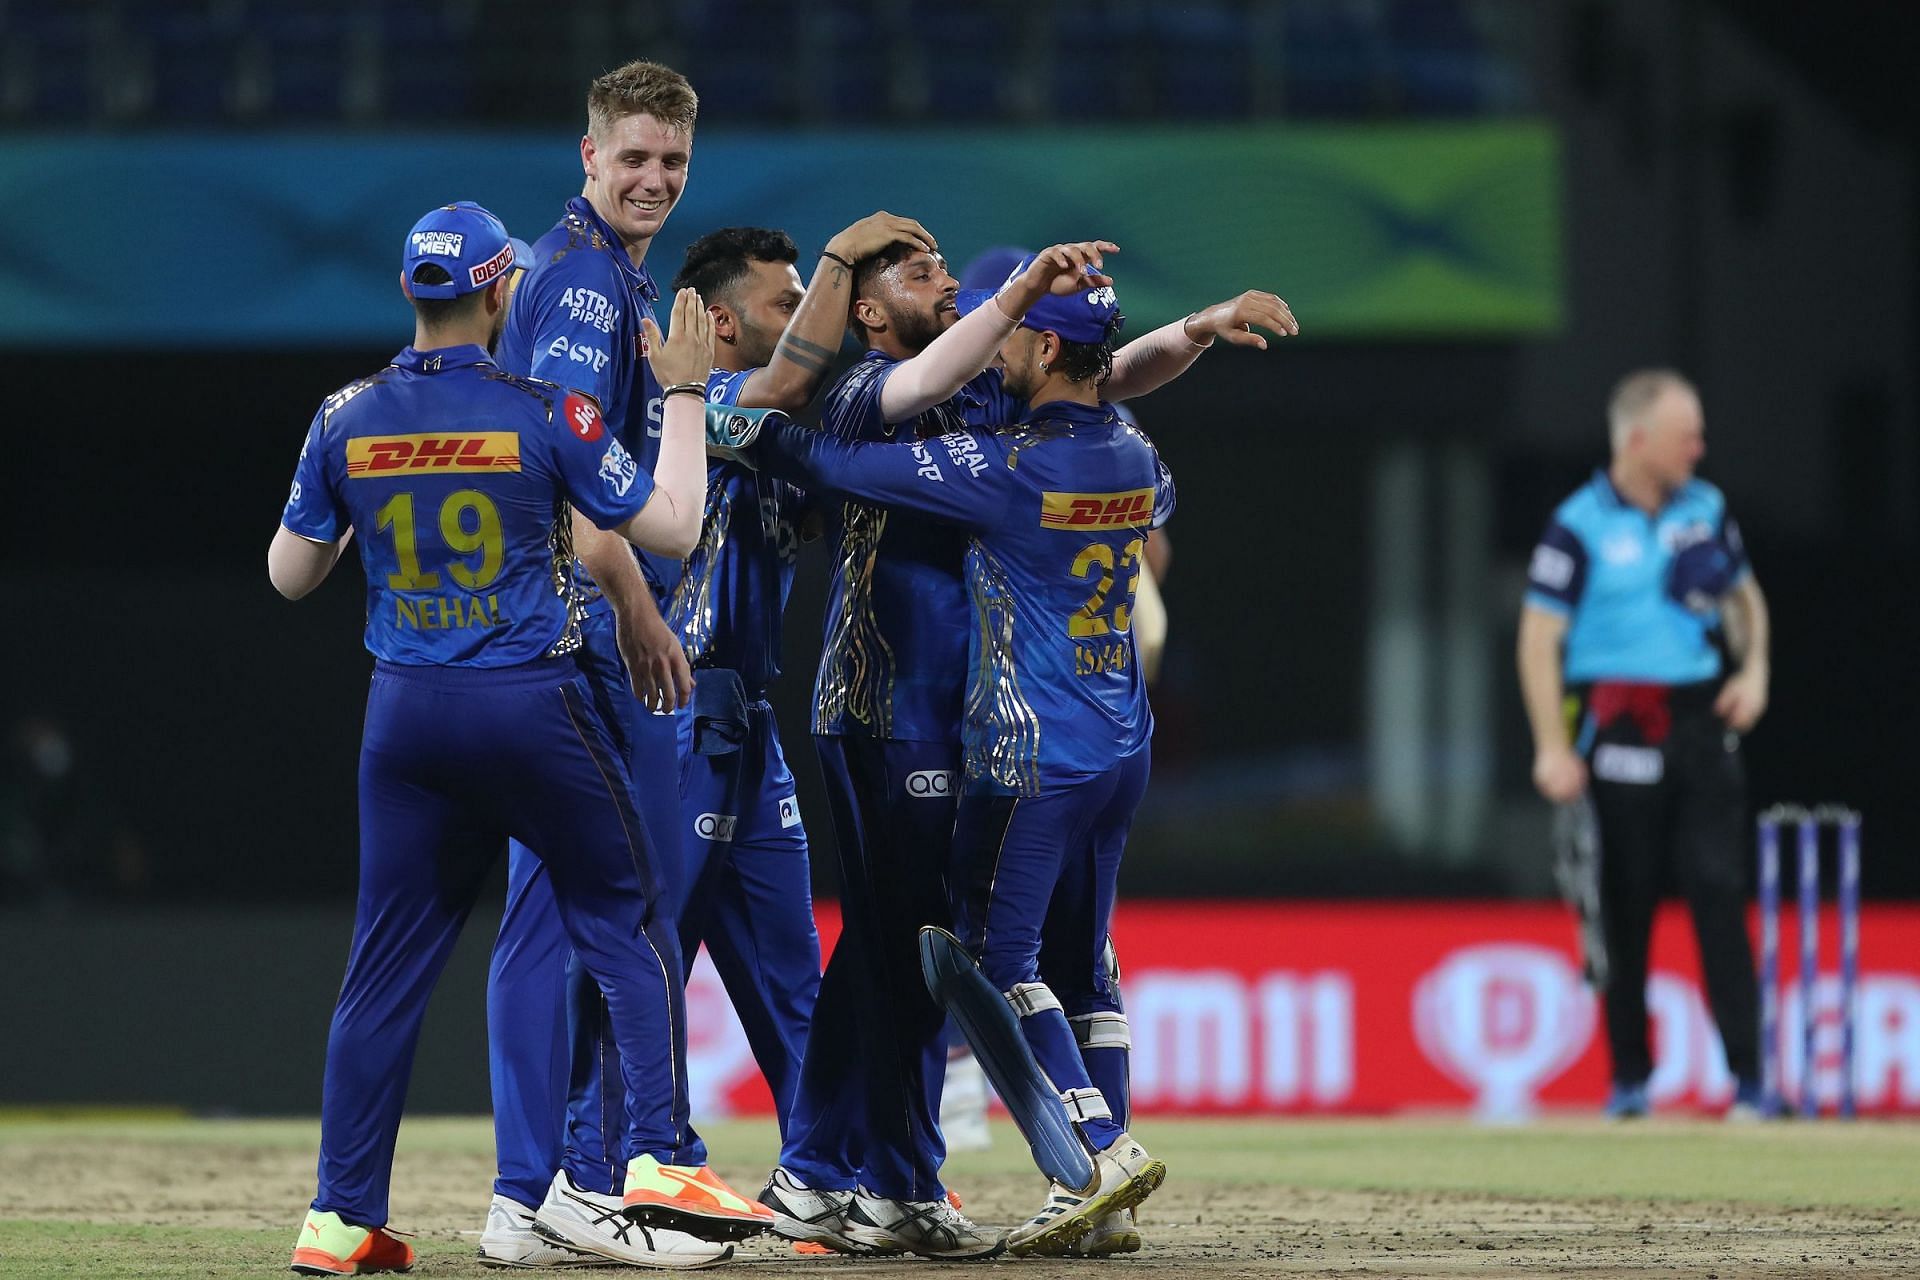 Mumbai Indians seem to be back to their best [Image: IPL Twitter]